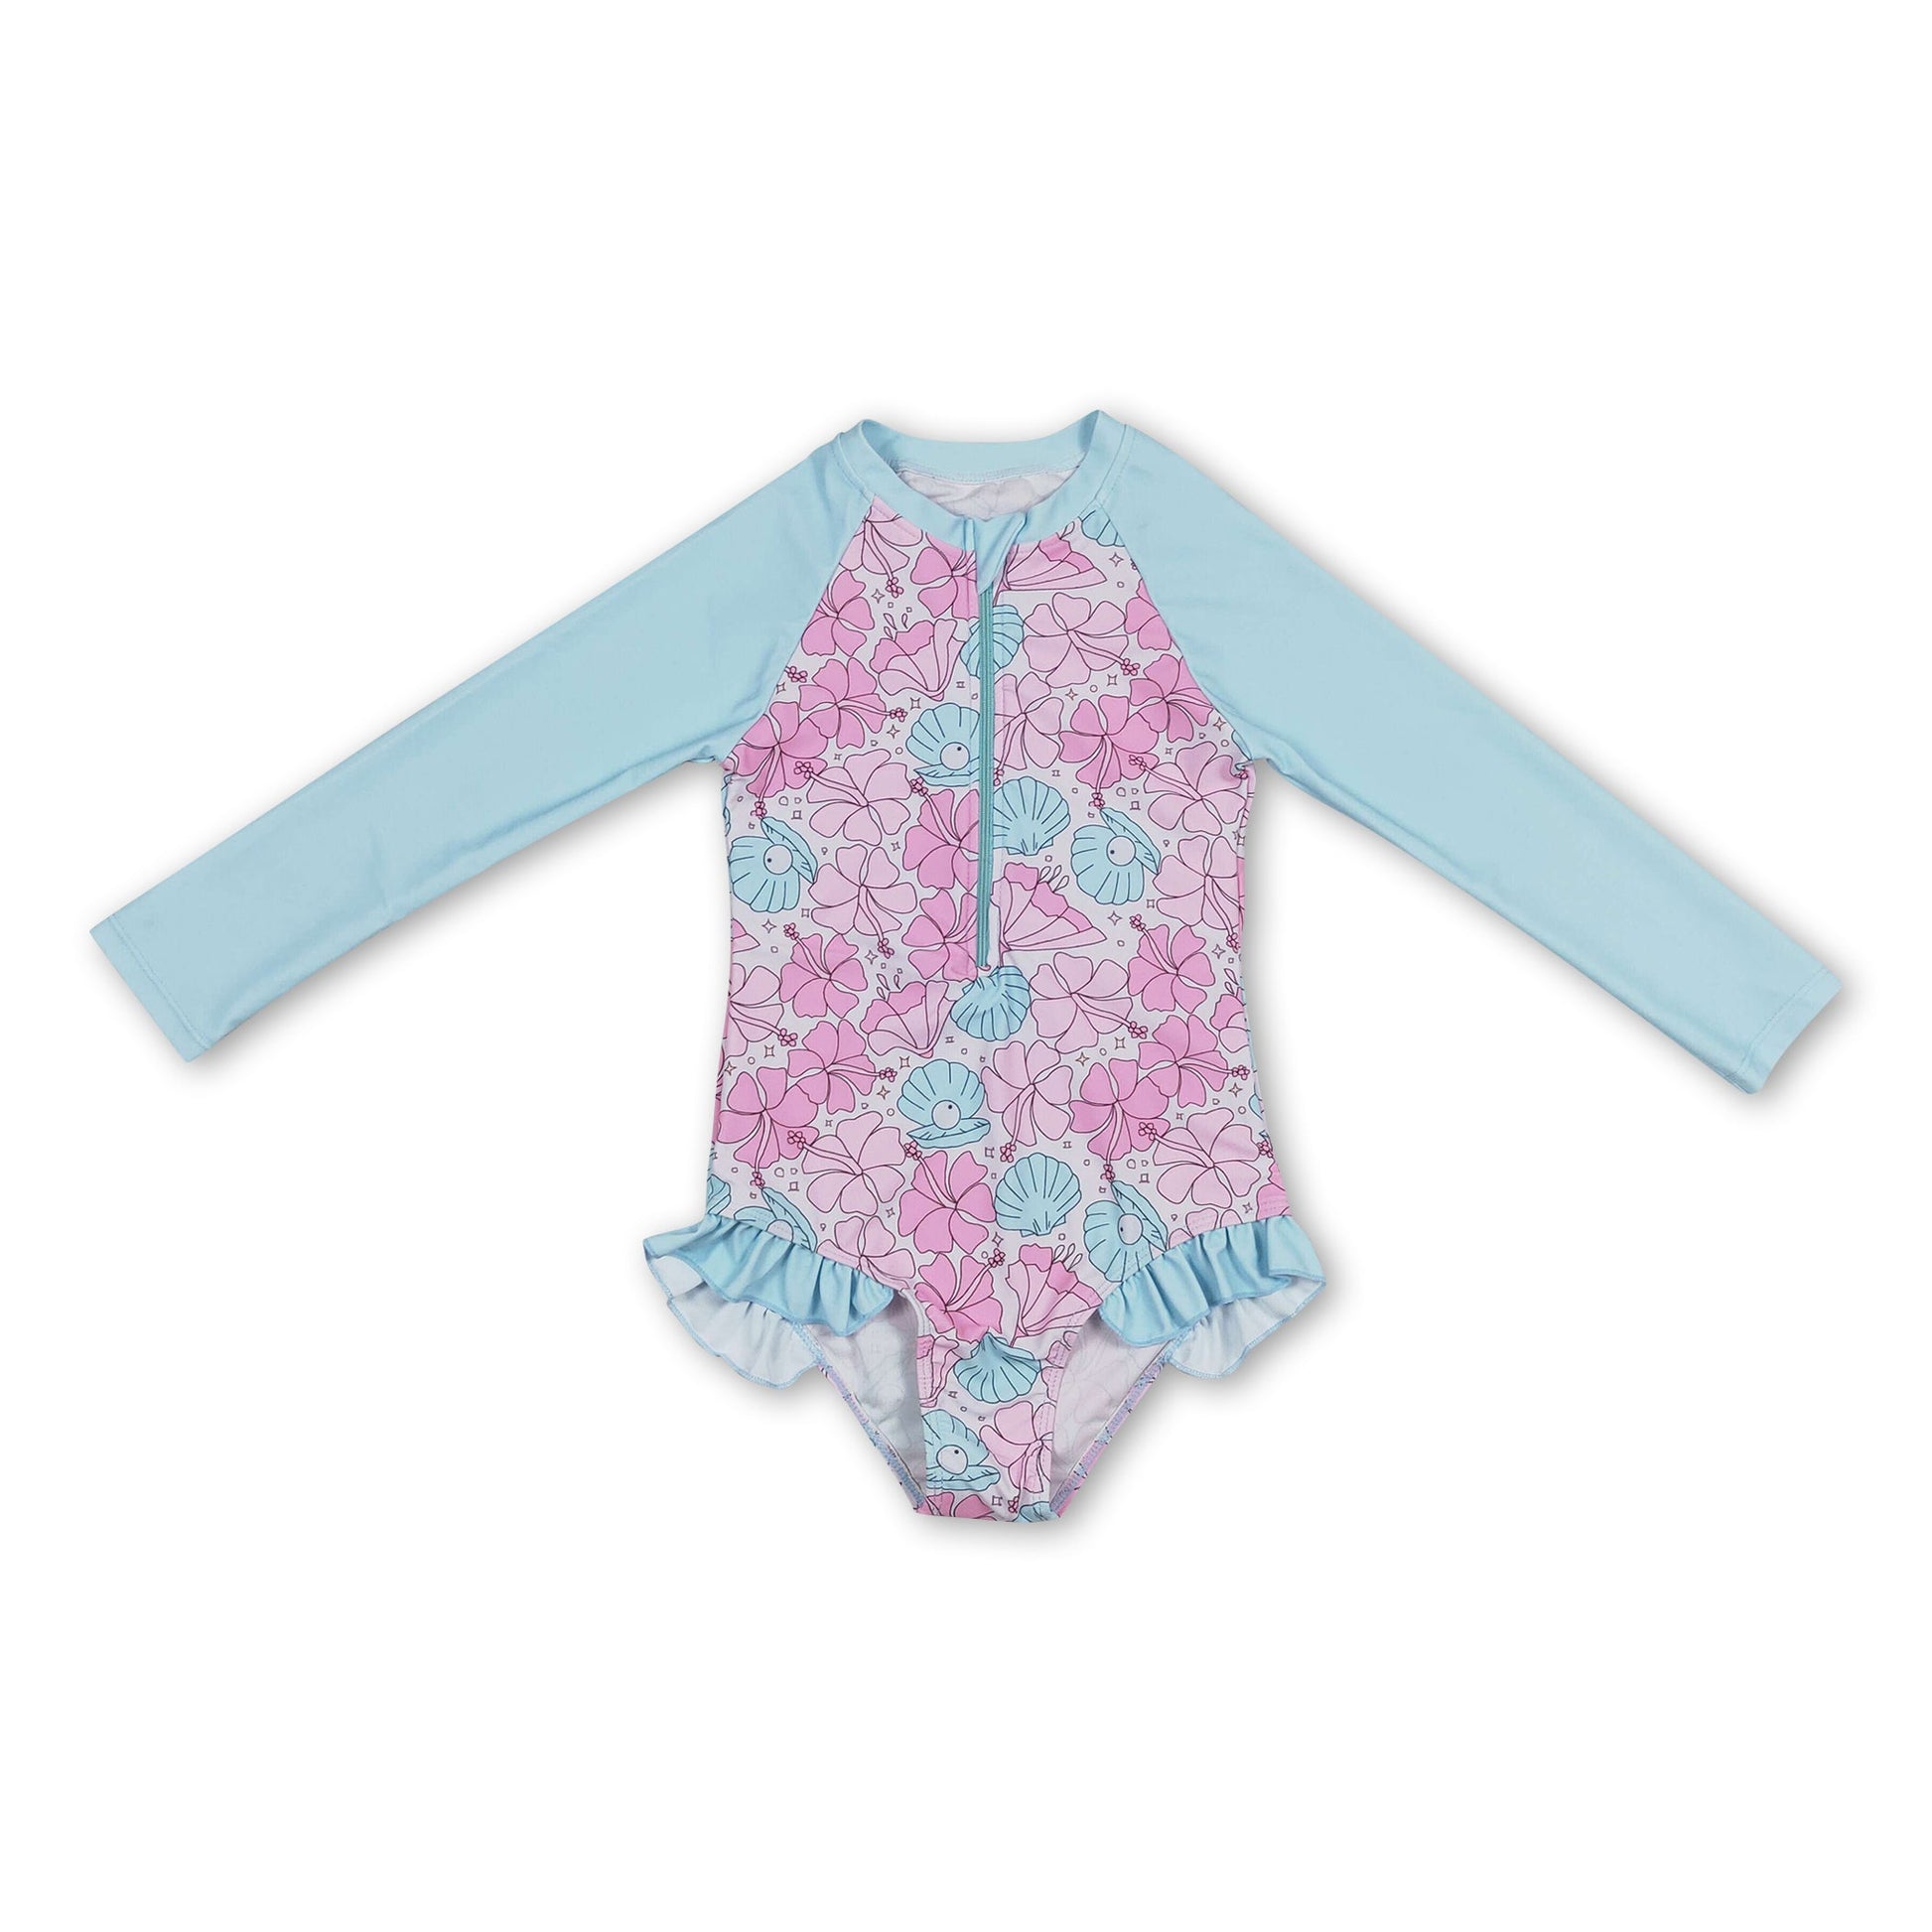 Long sleeves pink light blue shell pearl girls swimsuit – Yawoo Garments